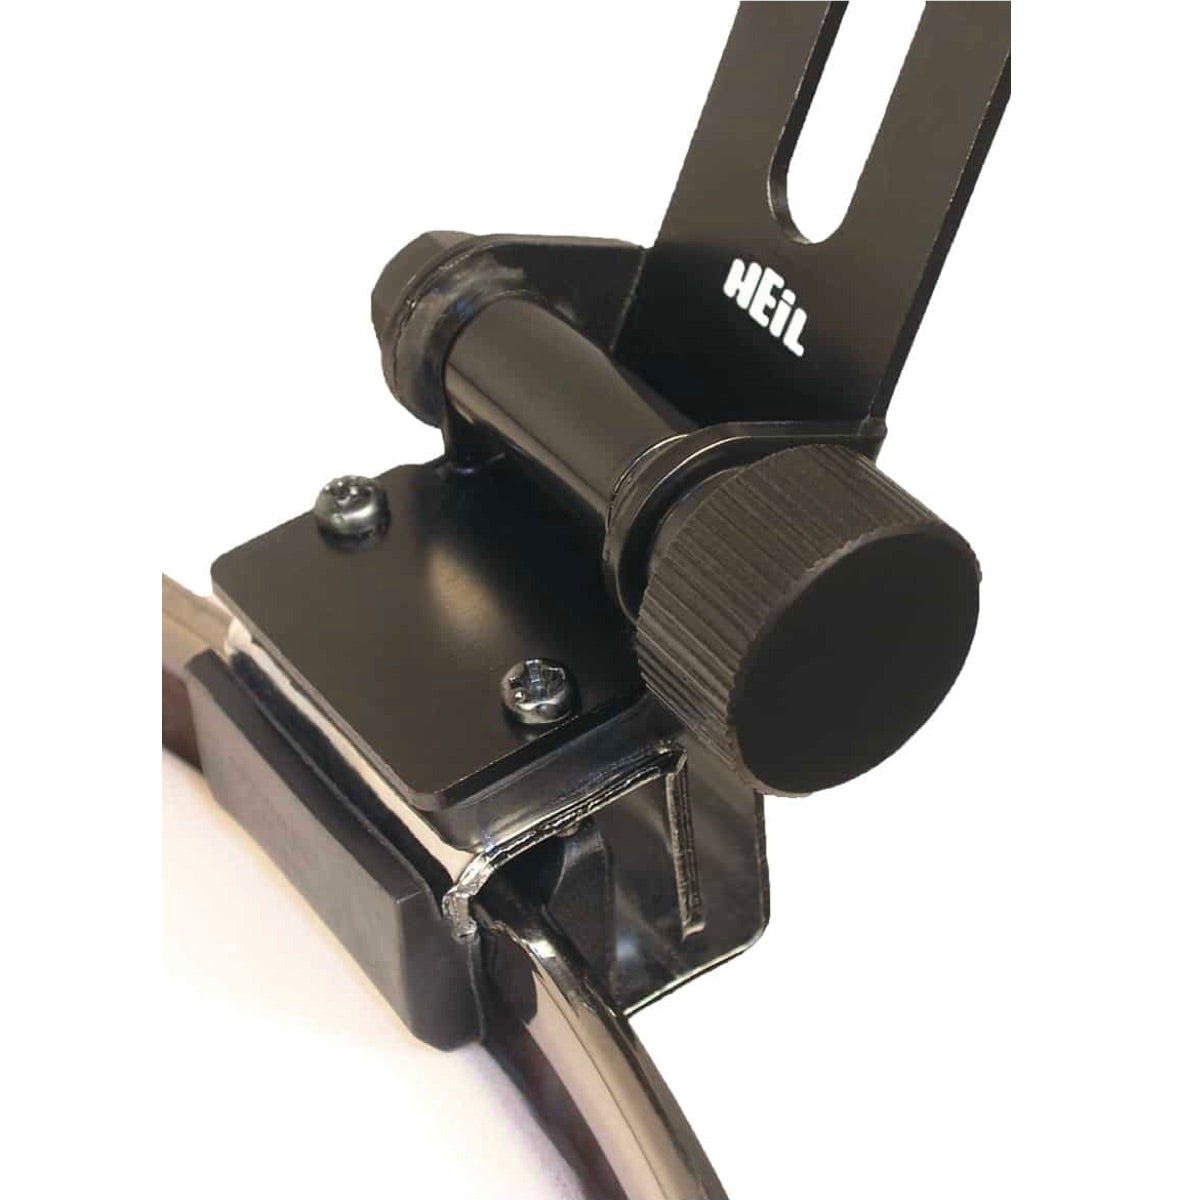 Heil HH-1 Drum Microphone Mount for Heil PR 28, attached to the rim of a drum